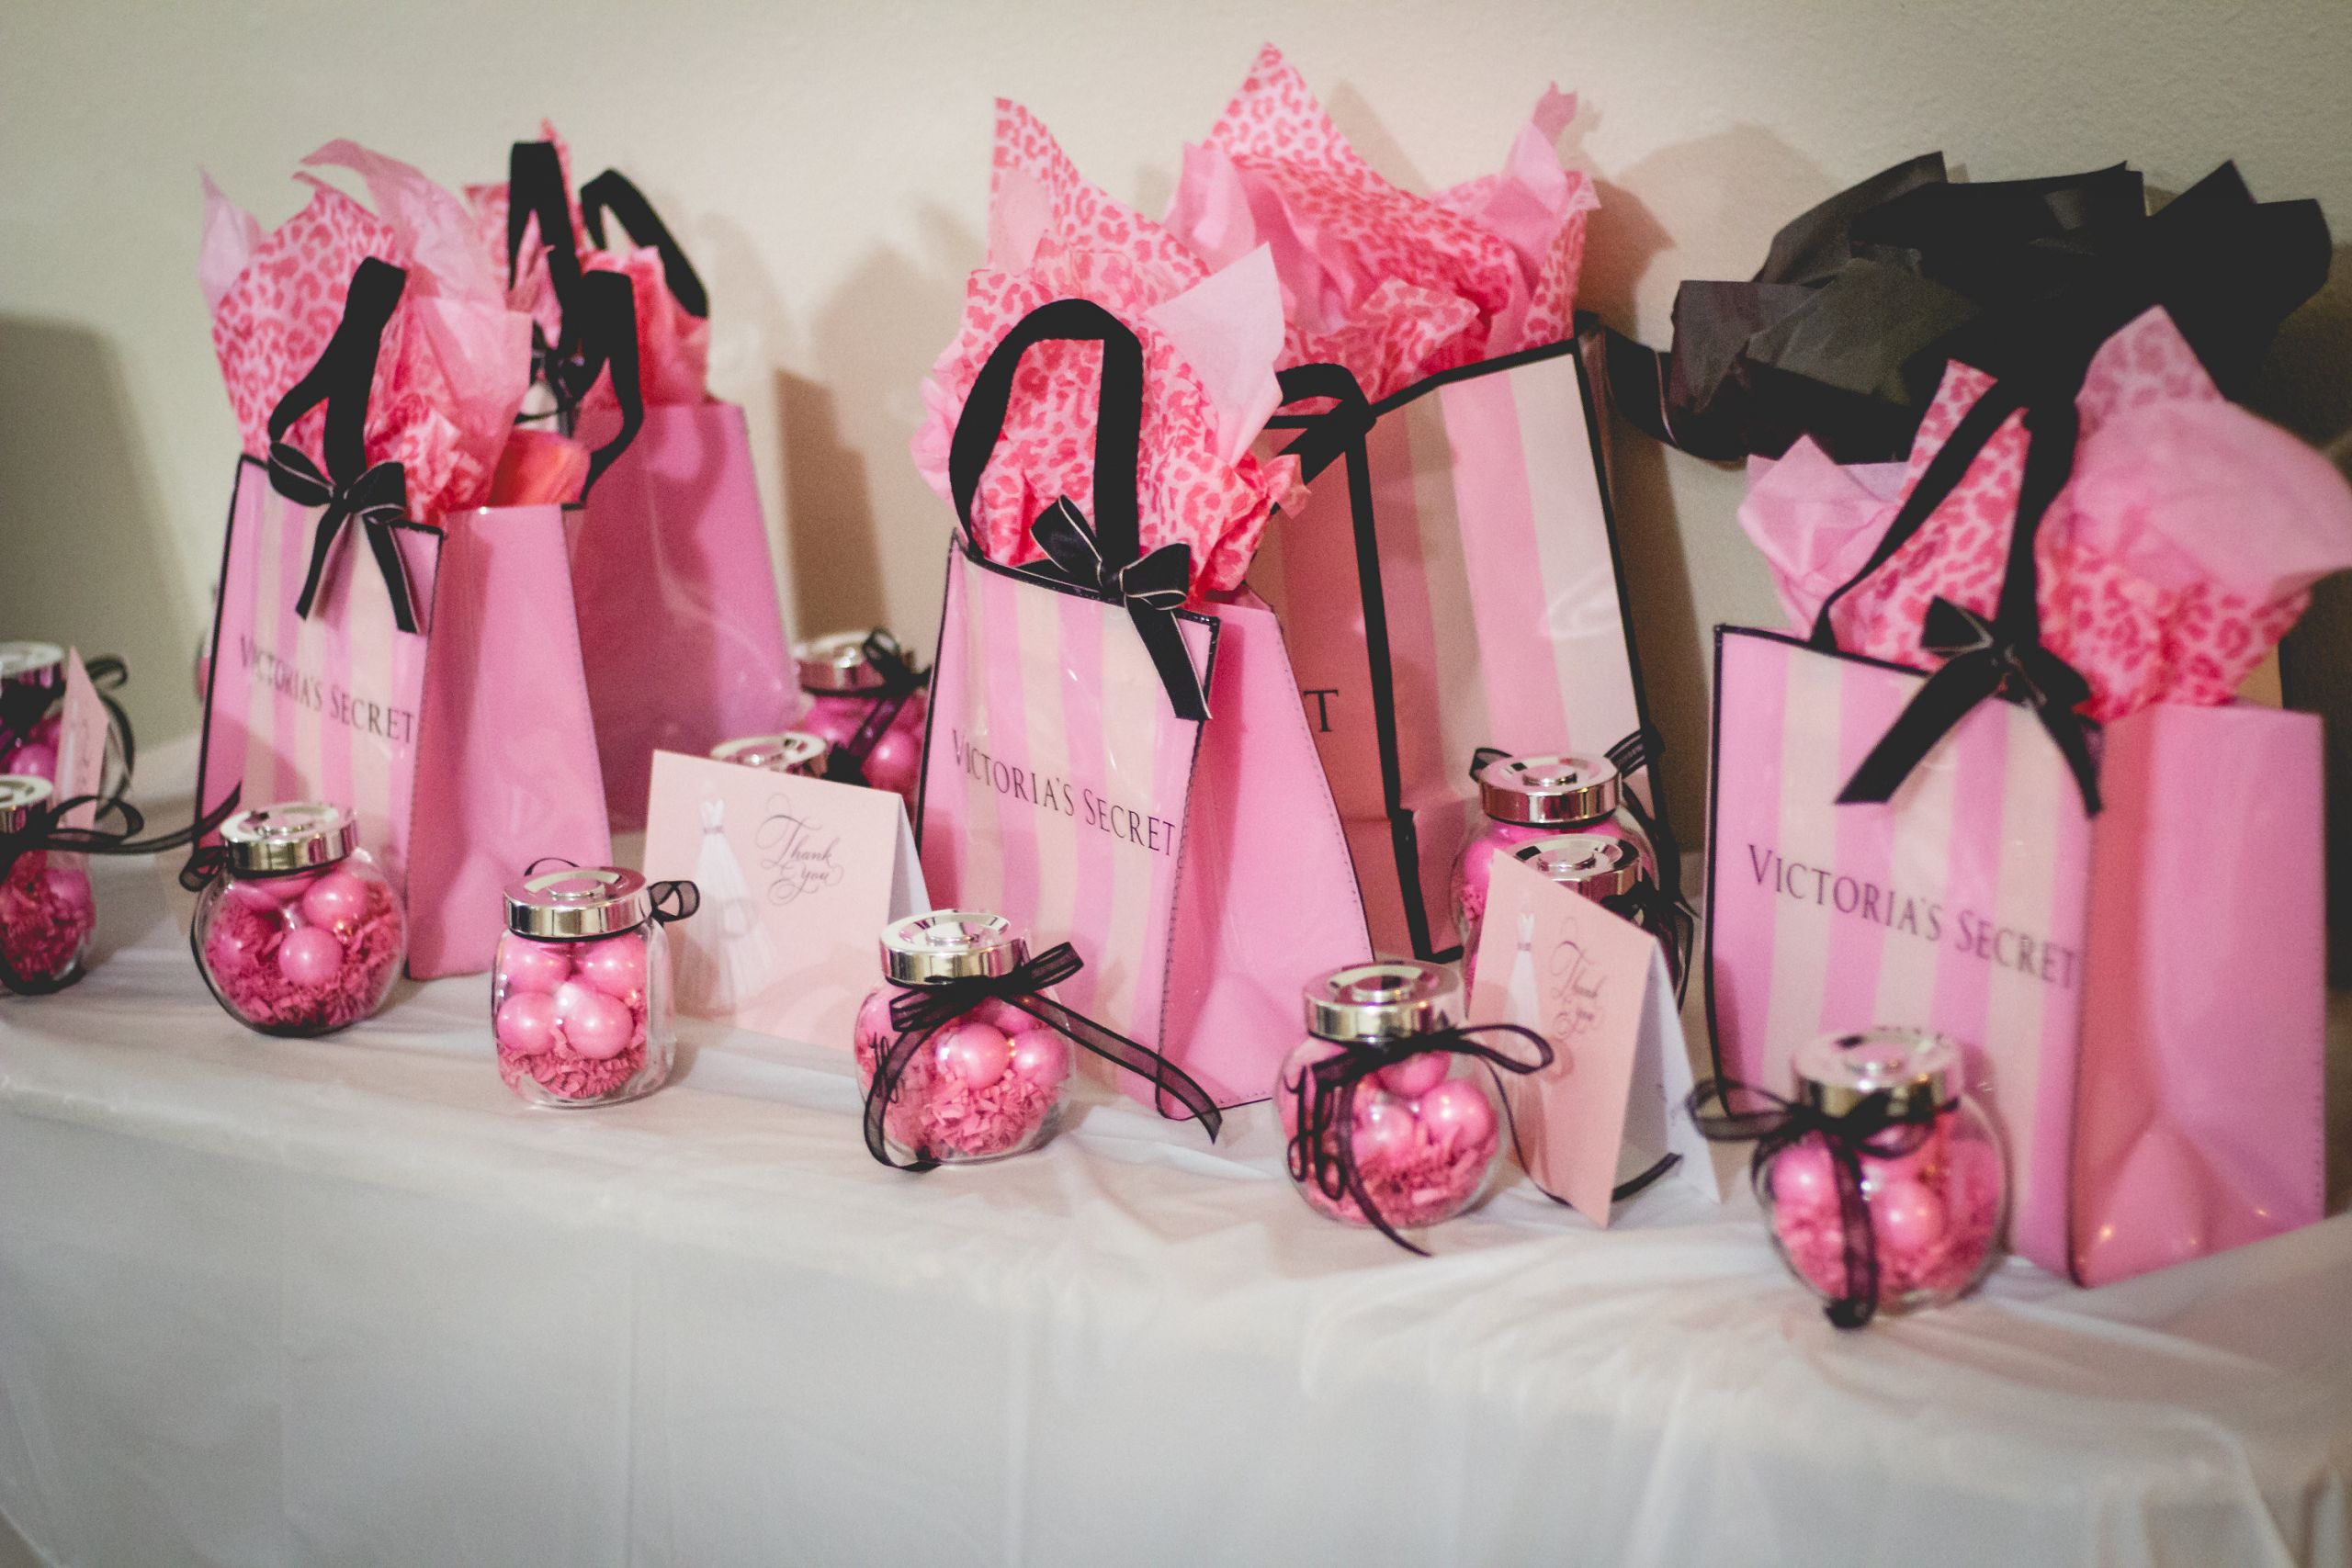 Lingerie Birthday Party Ideas
 A Lingerie & Painting Party Bridal Shower